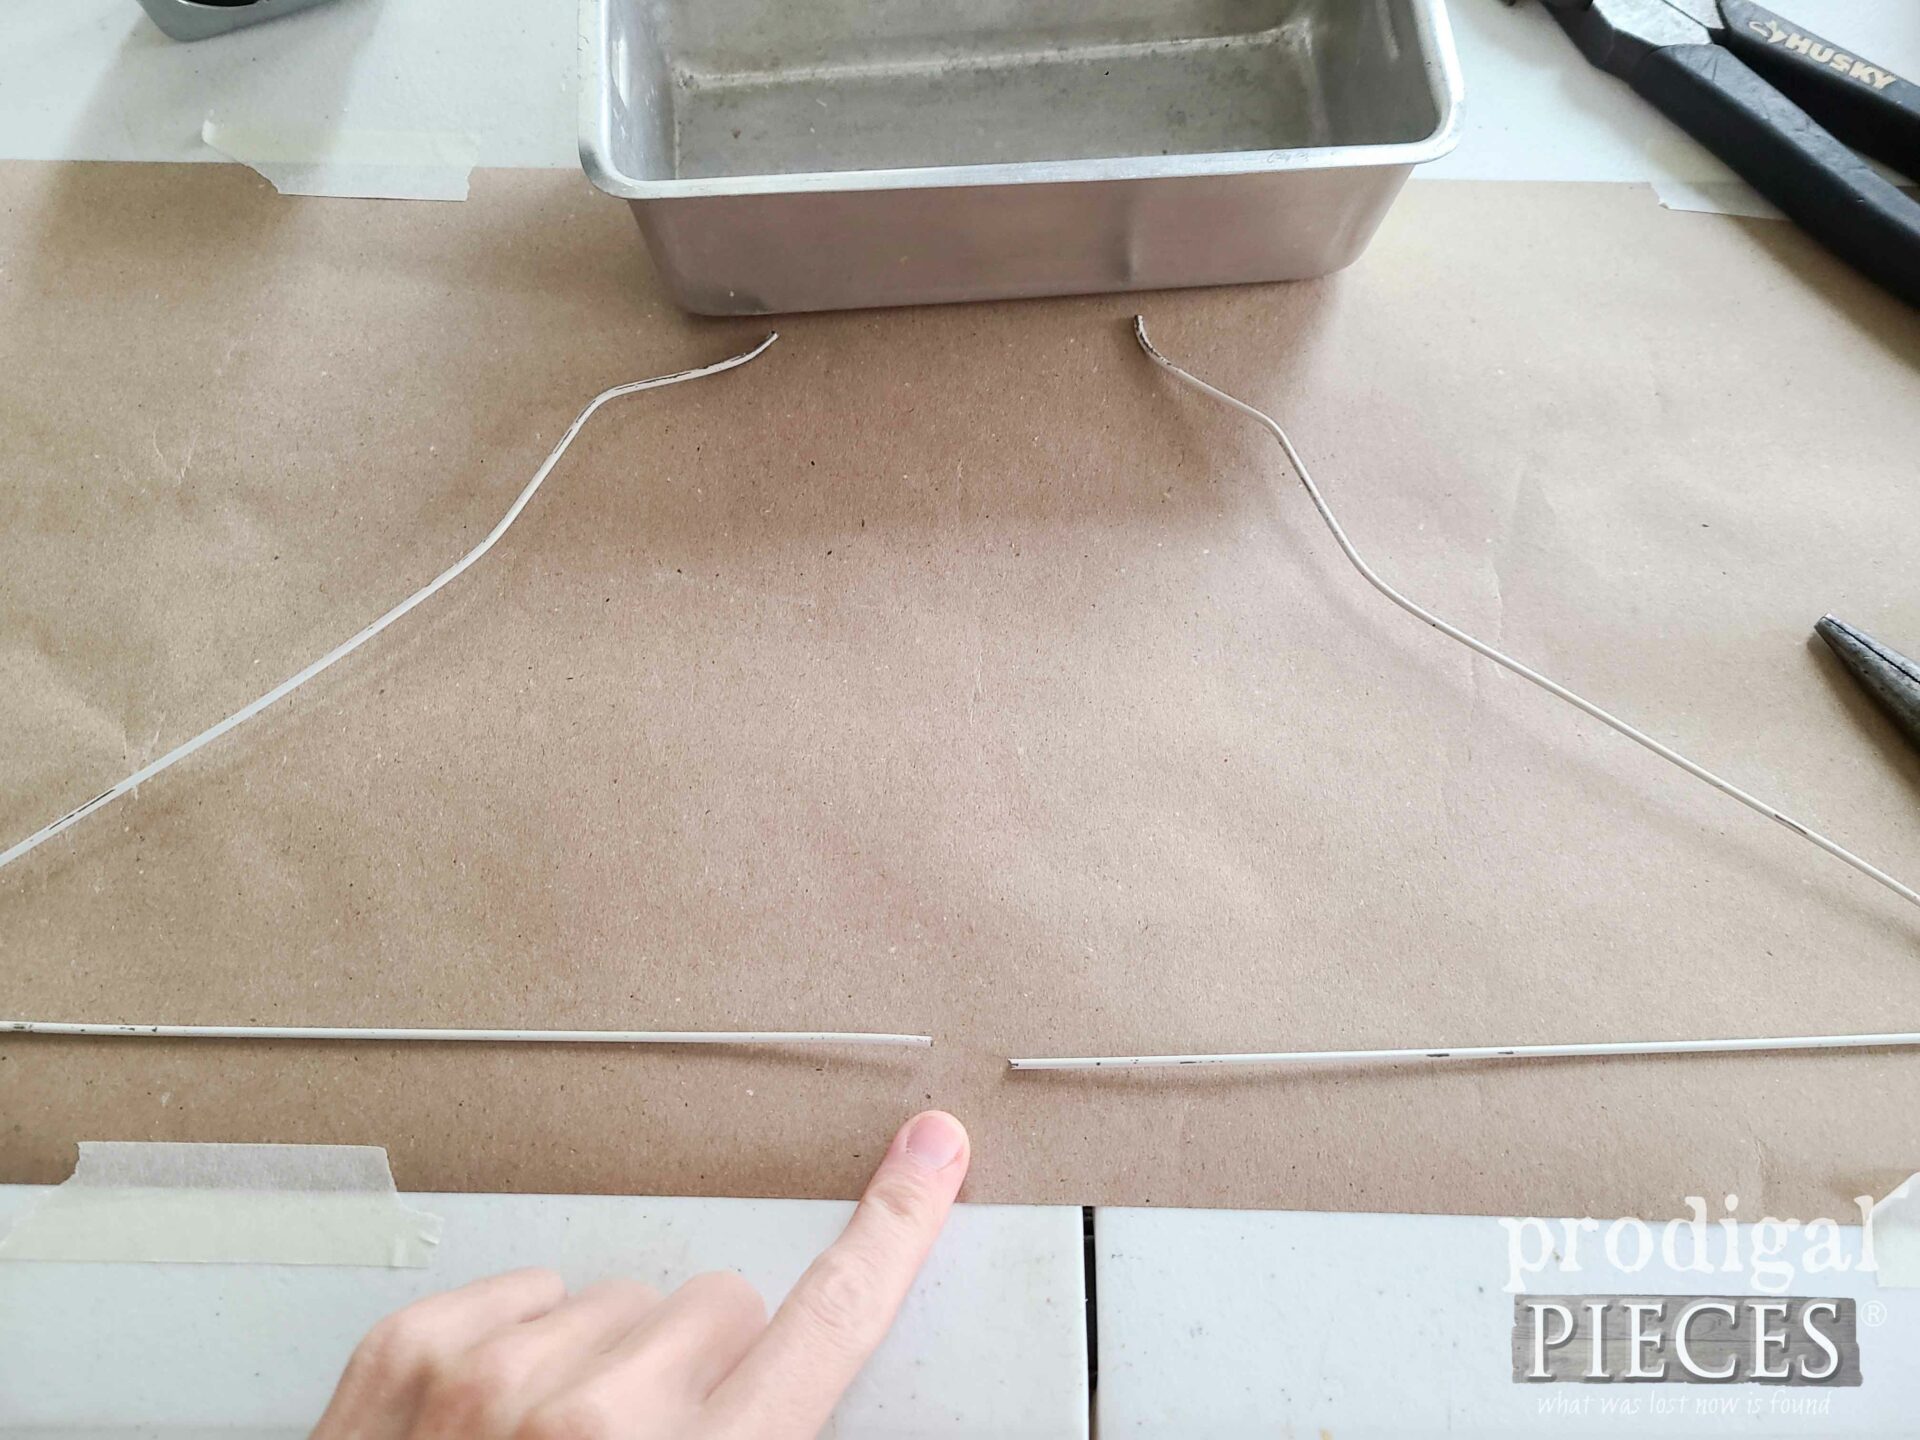 Cutting Wire Hanger for Upcycled Bread Pan Sleigh | prodigalpieces.com #prodigalpieces